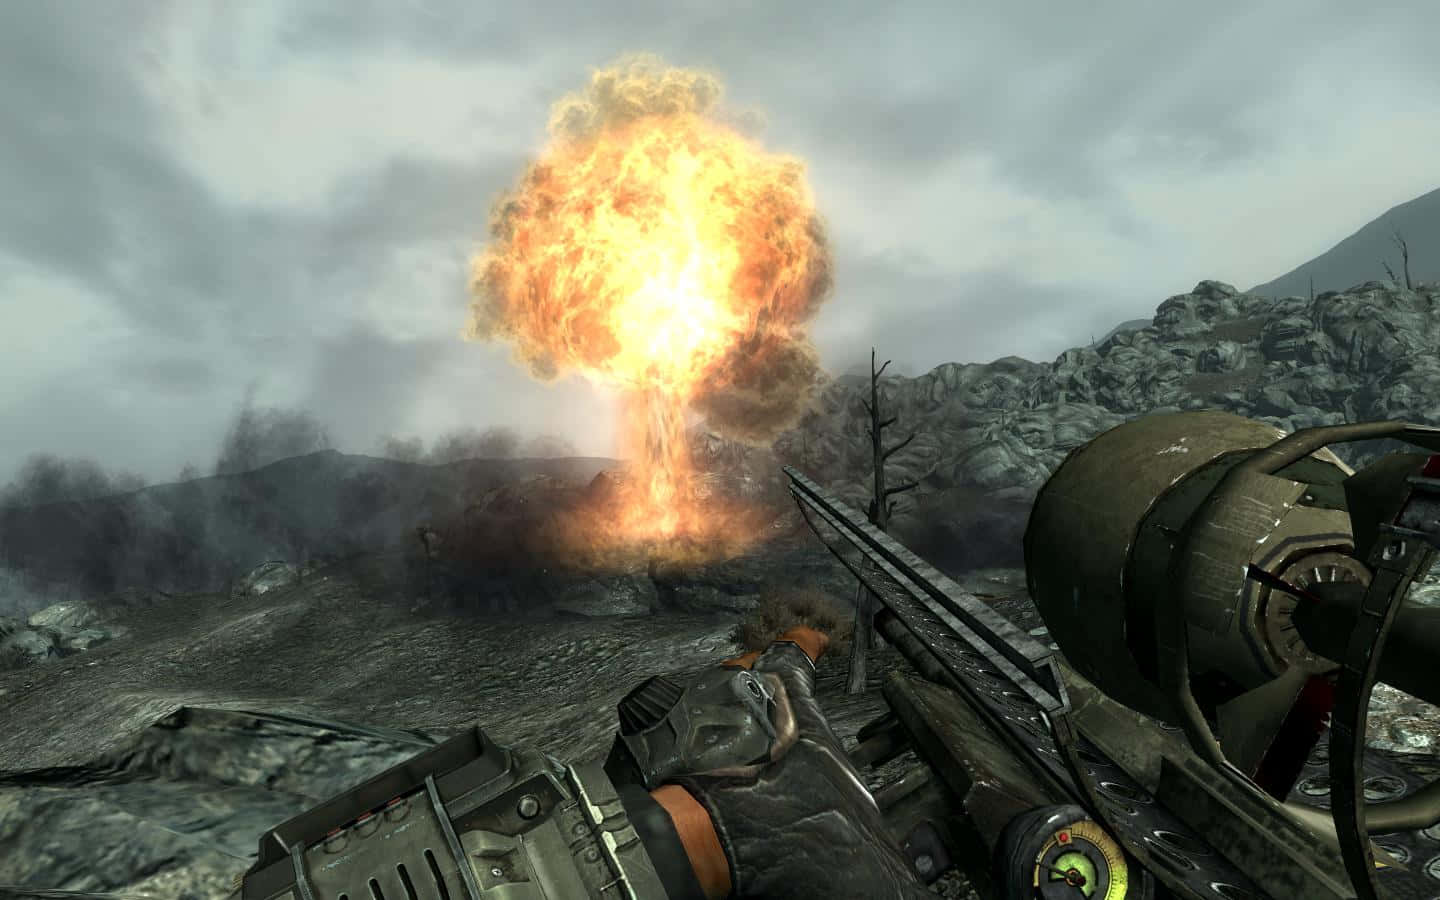 Apocalyptic Destruction in the World of Fallout Nuke Wallpaper